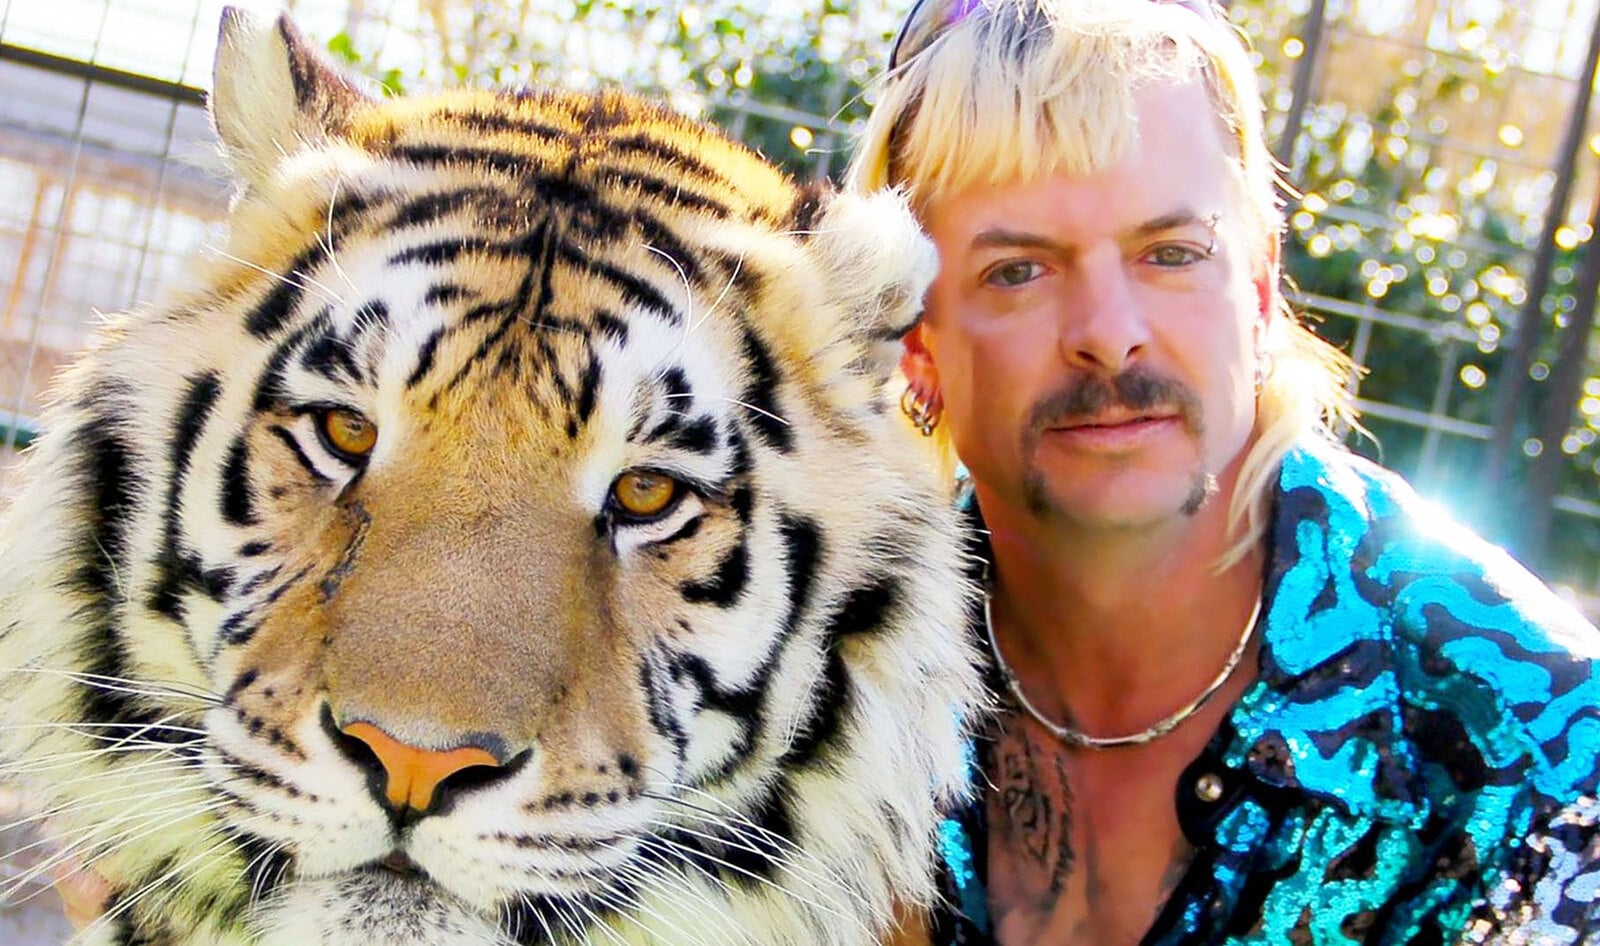 Did You Binge Watch <i>Tiger King</i>? Now There’s a Way You Can Help Tiger Cubs